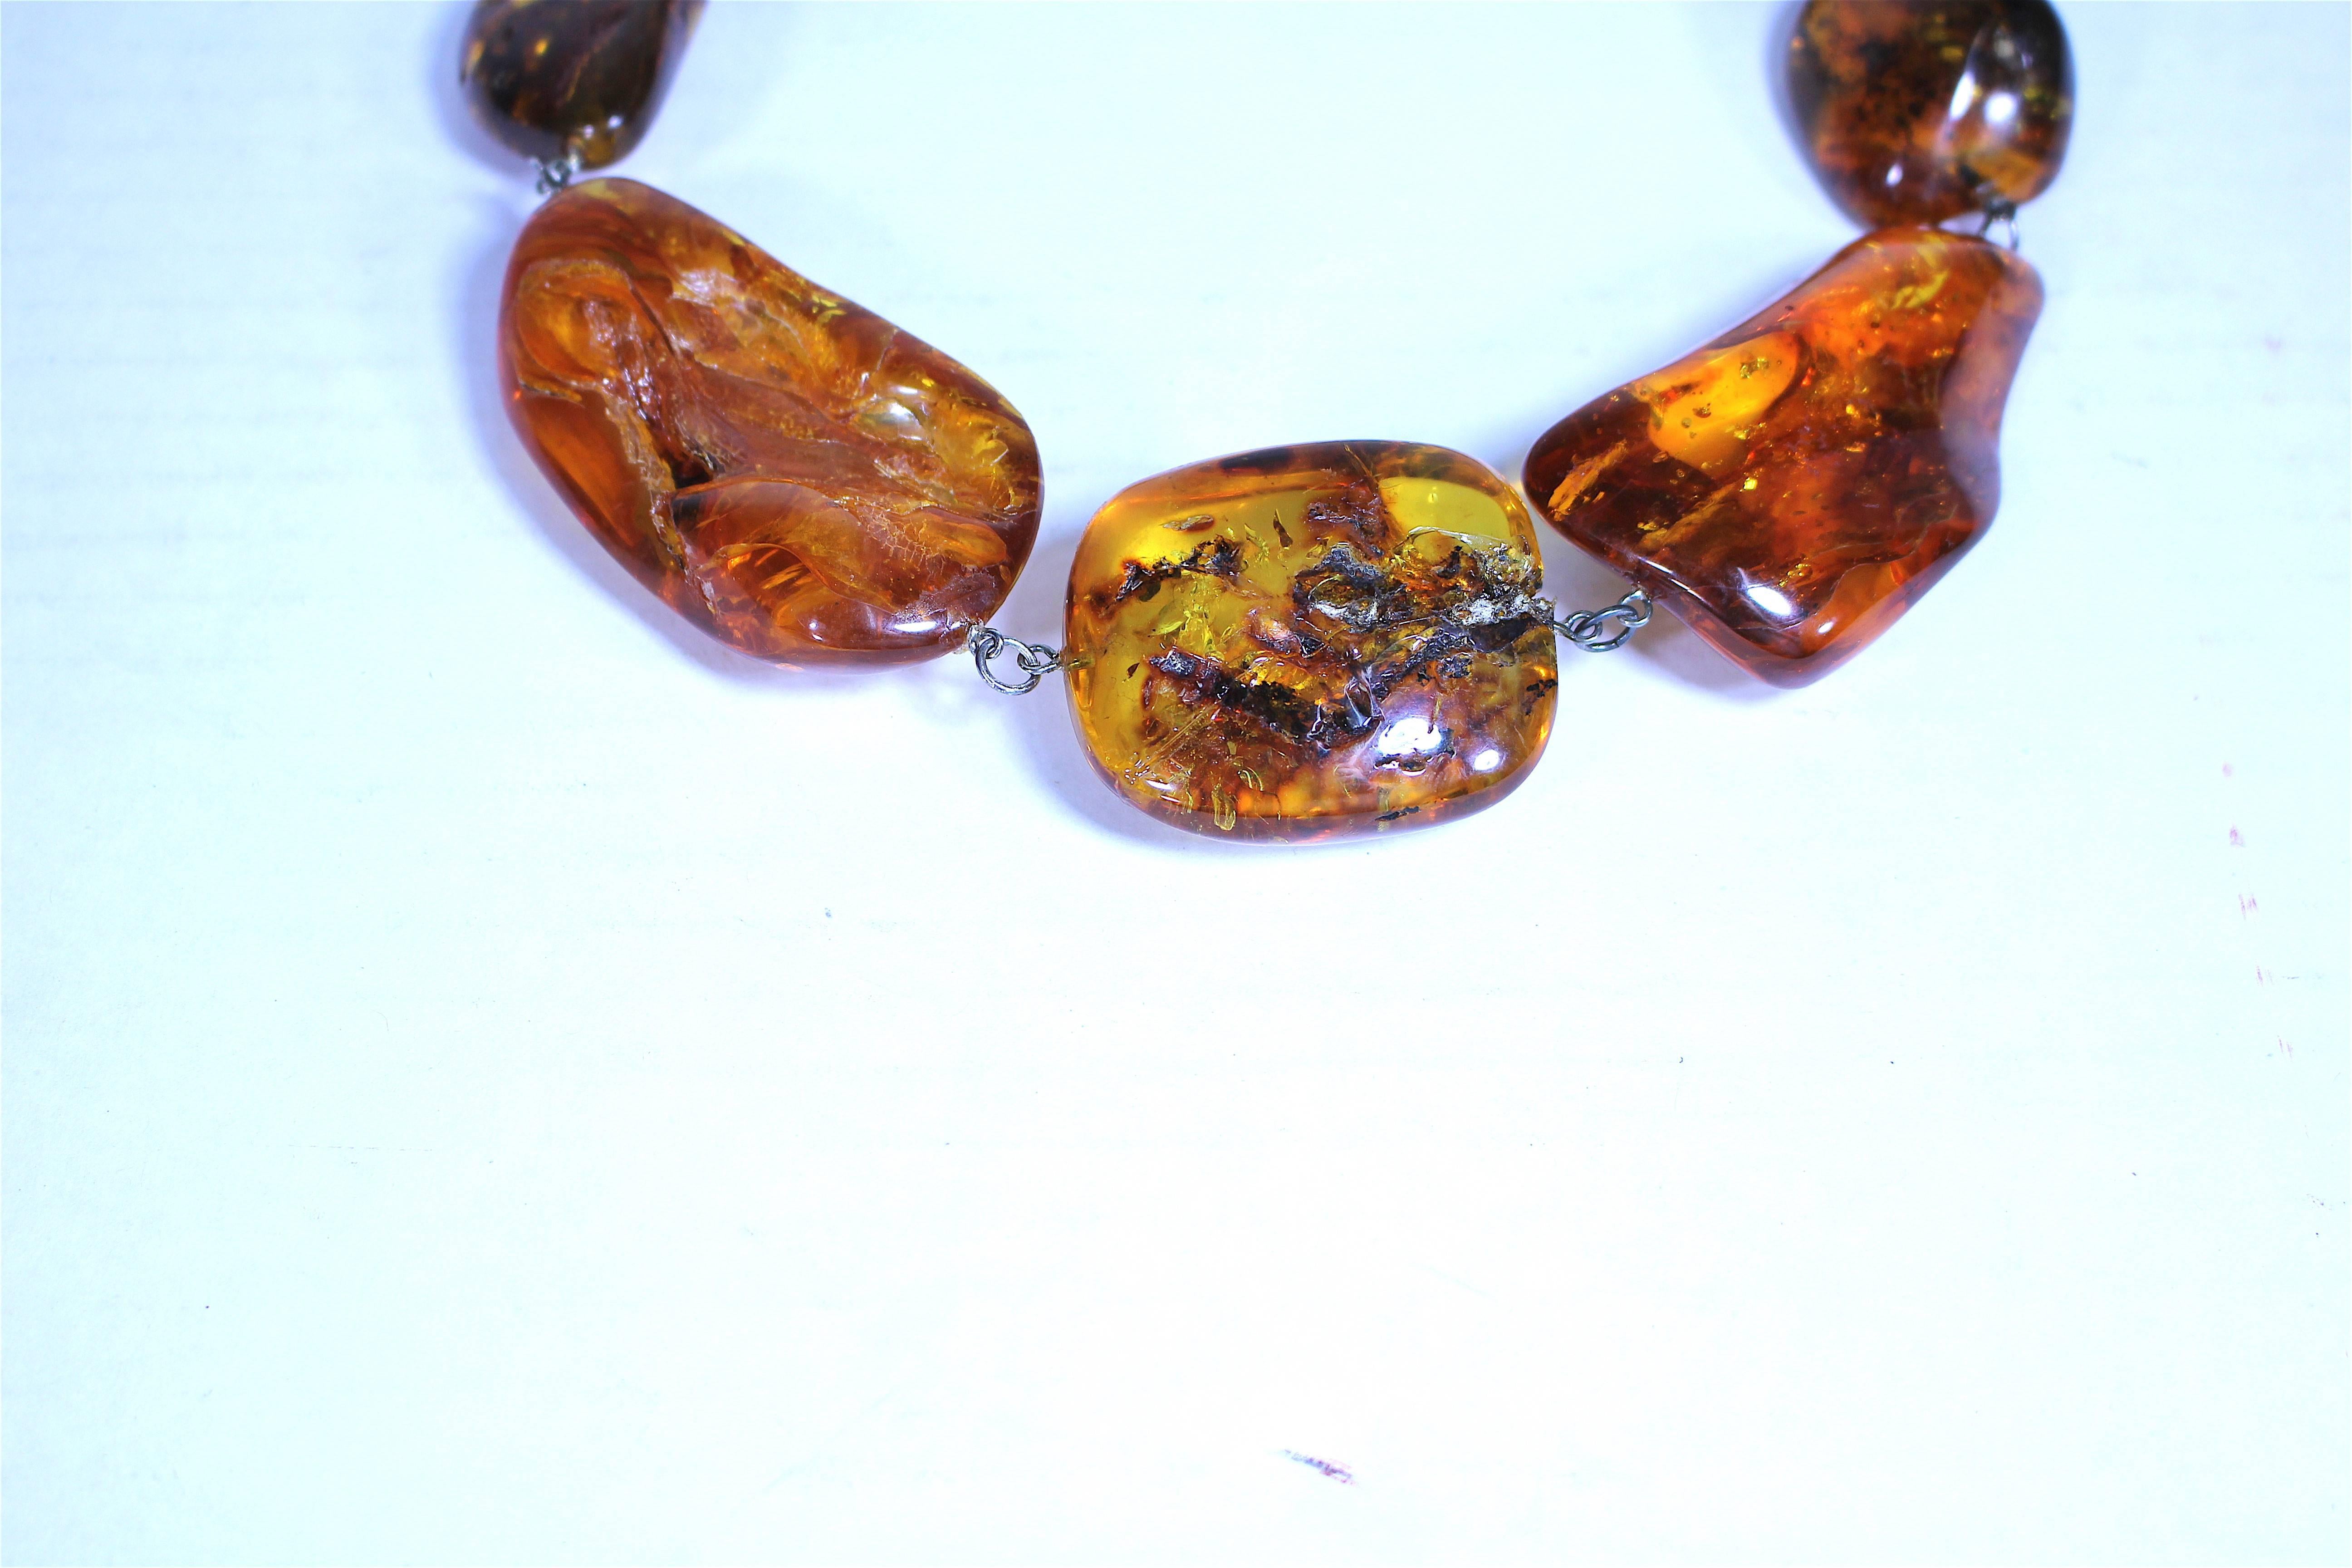 The massive "dollop" of fossilized tree resin, known as Amber, has several unusual inclusions has been forever preserved inside which makes it extremely special. This example is a quality piece in terms of its size, inclusion, clarity and